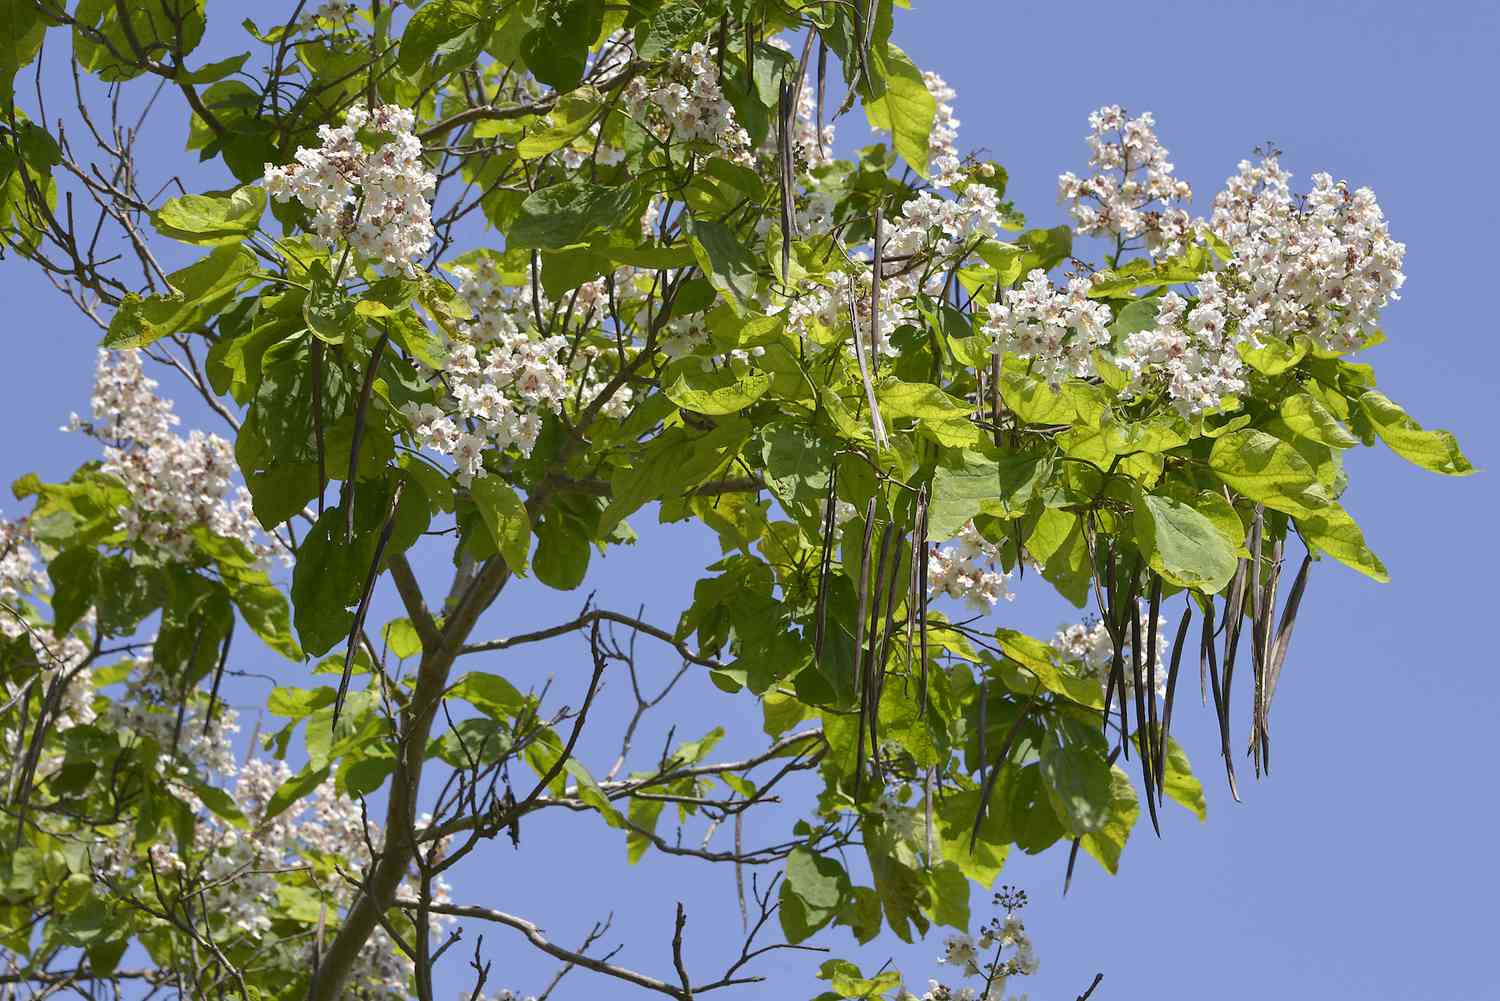 Catalpa tree displaying flowers, large leaves and seed pods against a blue sky